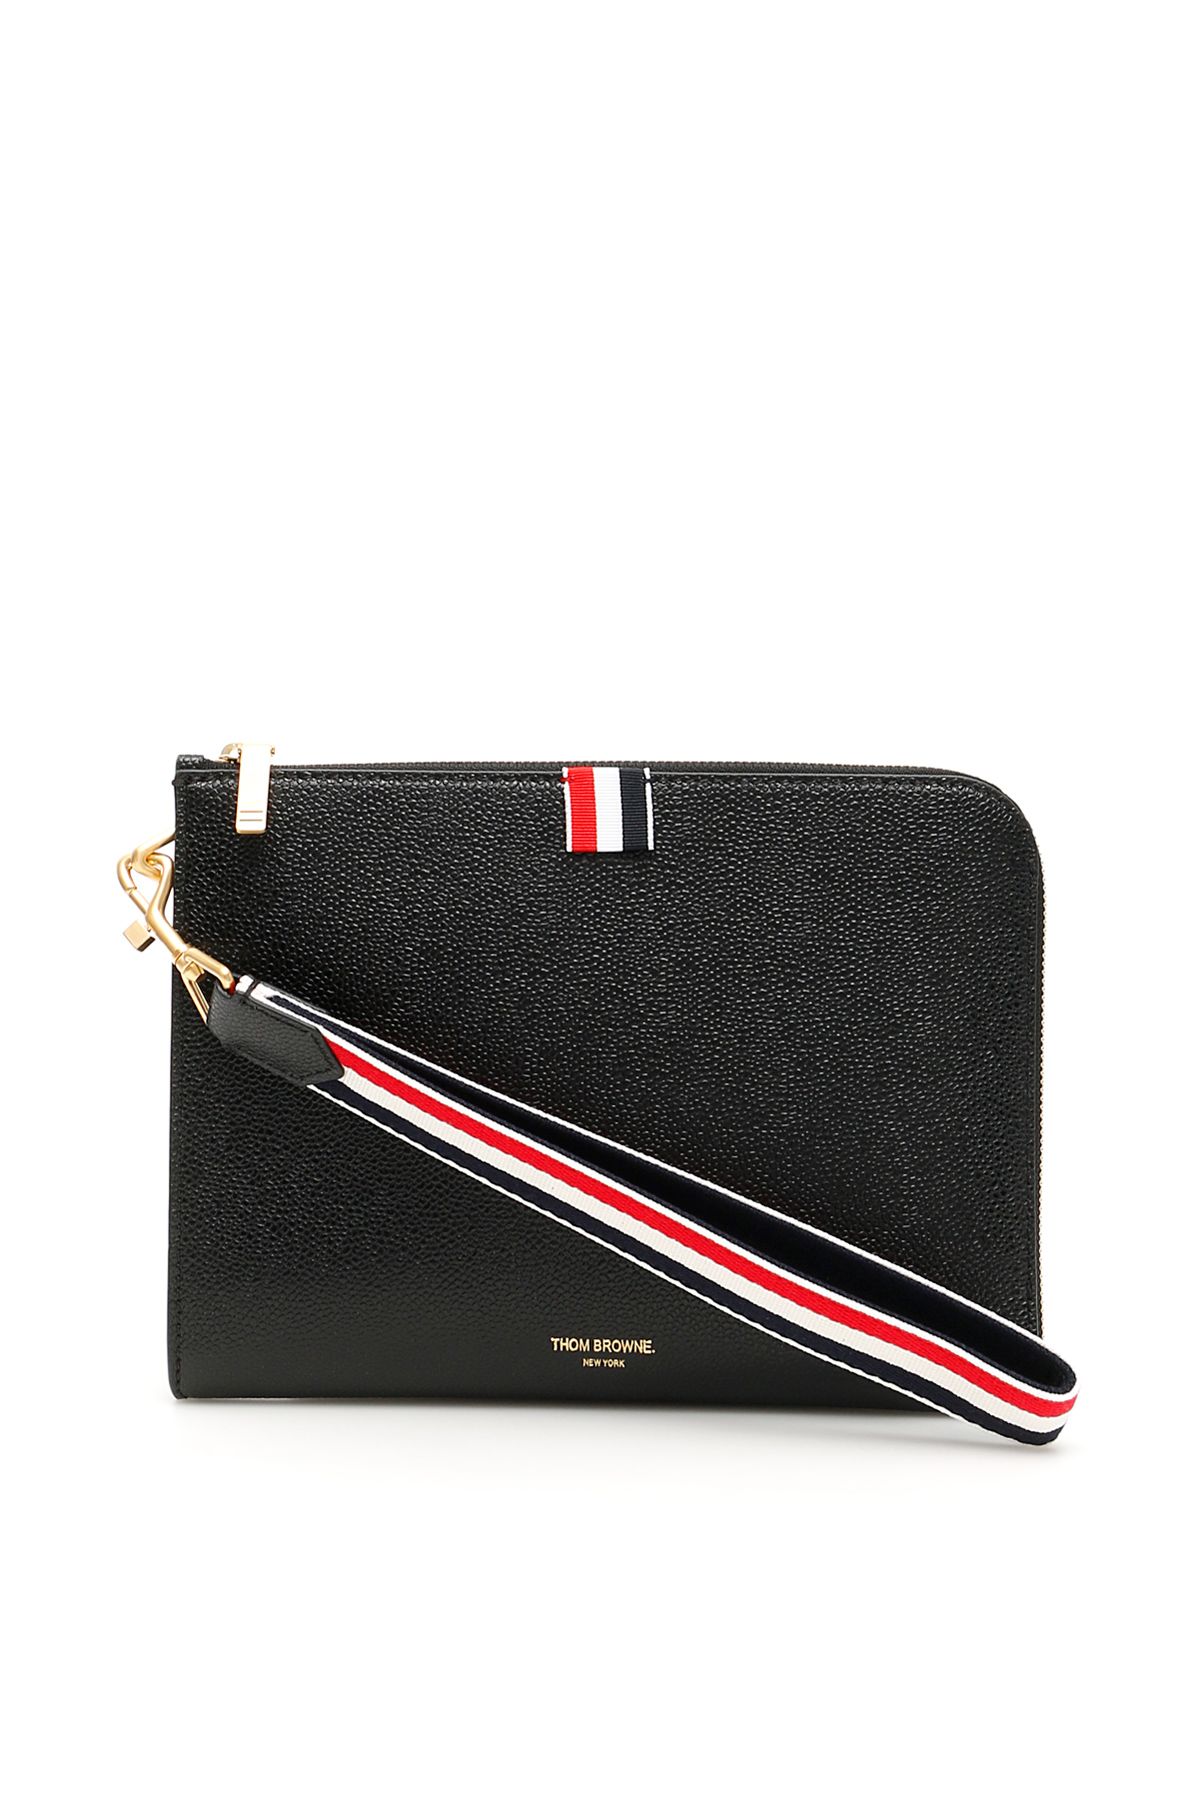 Thom Browne Small Grain Leather Pouch In Black (black)